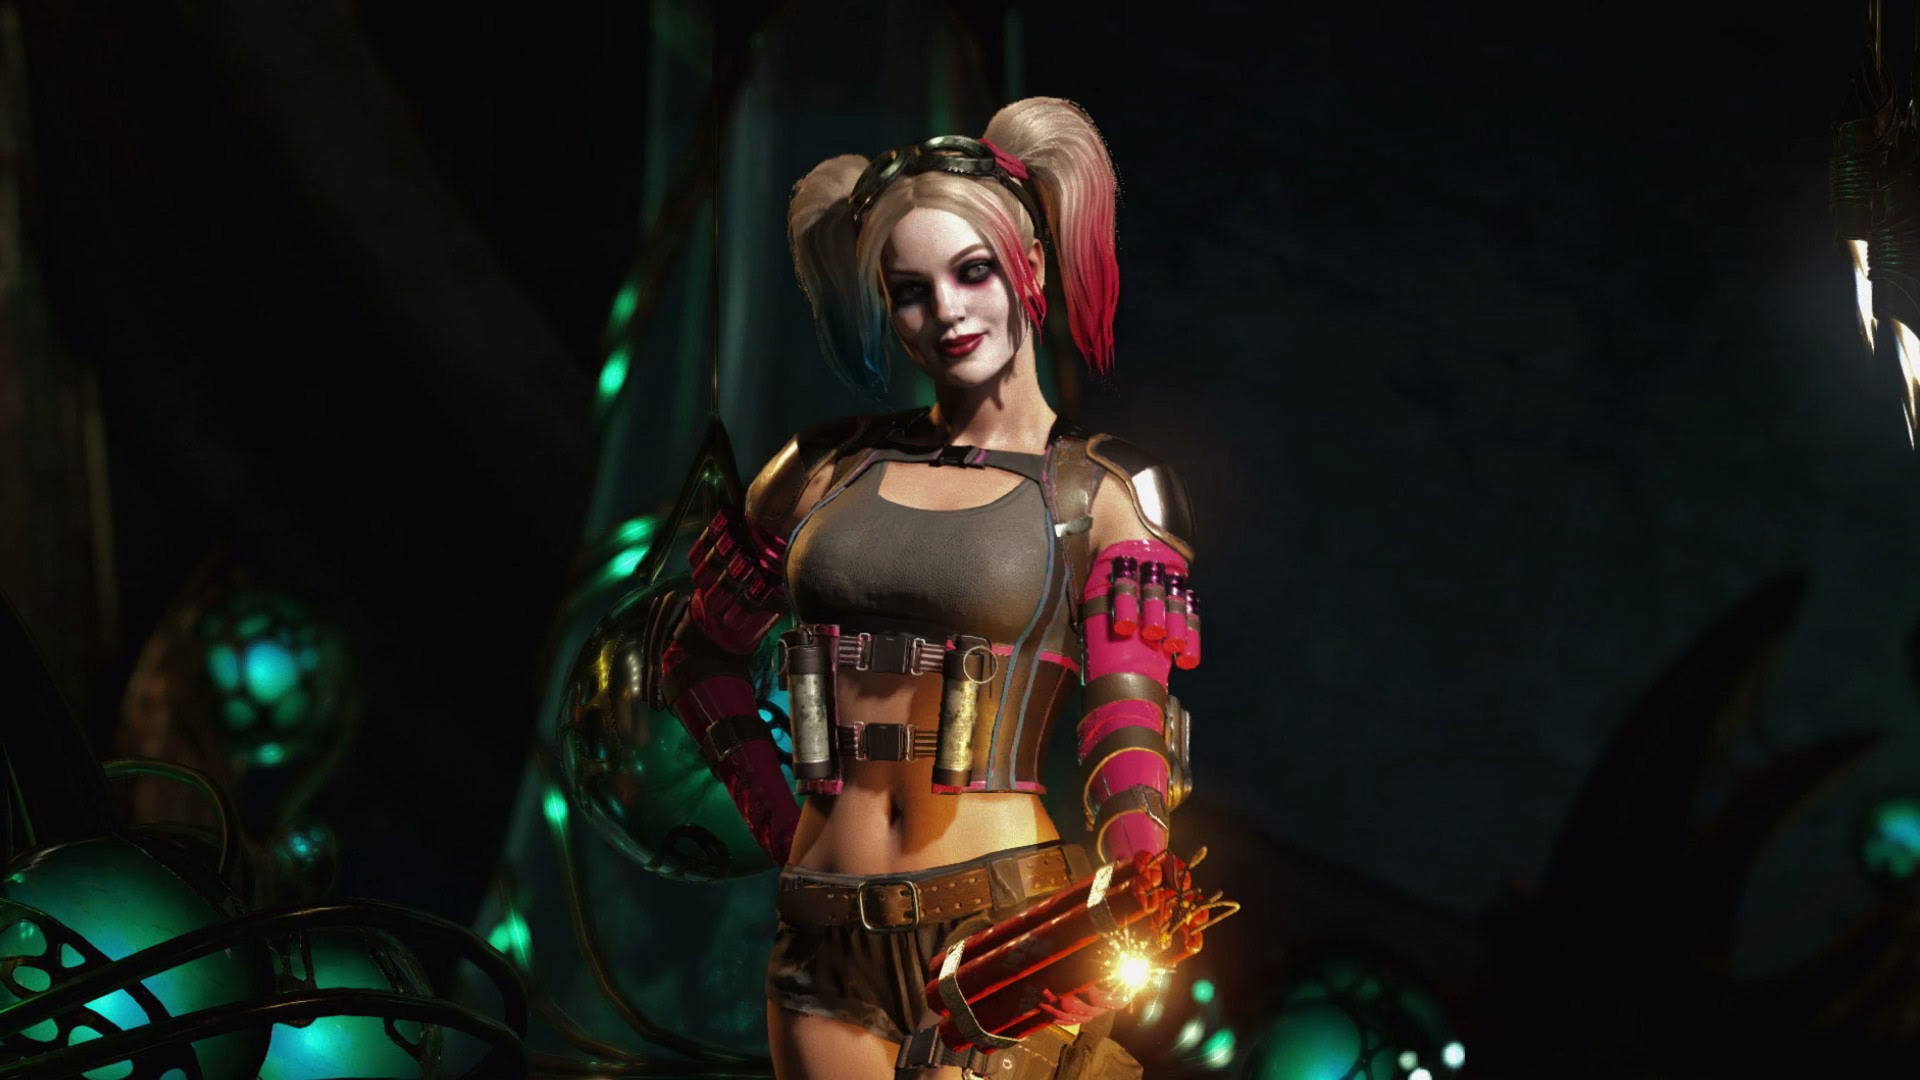 1920x1080 injustice harley quinn wallpaper Injustice 2 Full HD Wallpaper and  Background Image  ID:738175